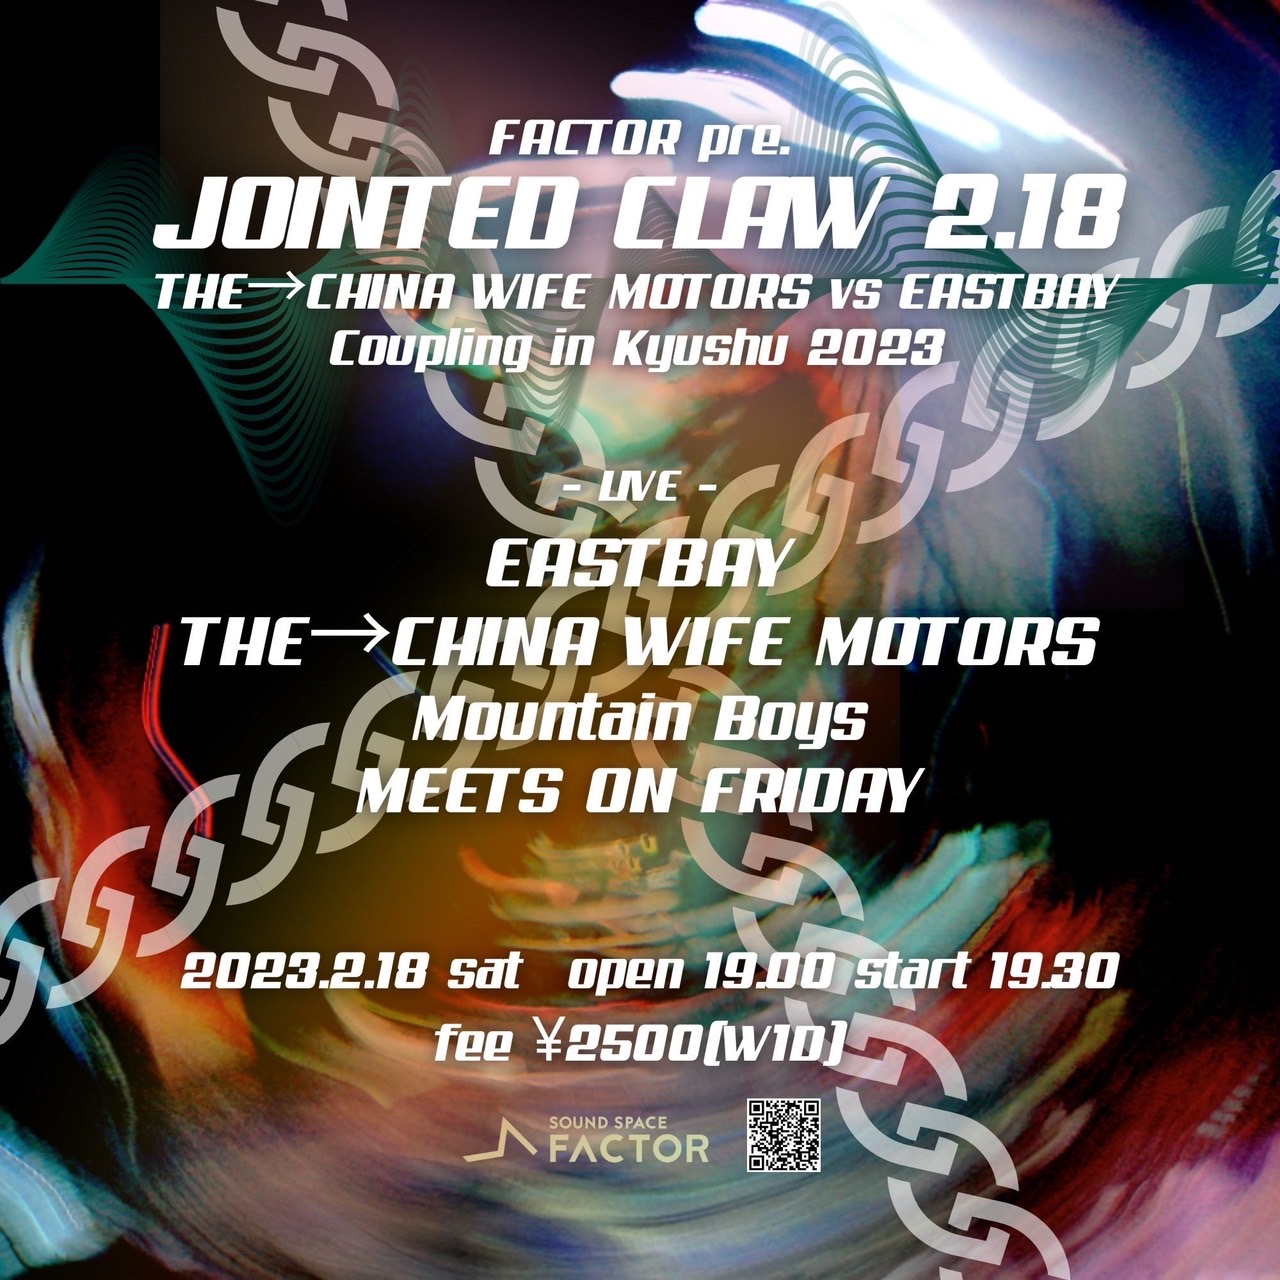 JOINTED CLAW 2.18の写真